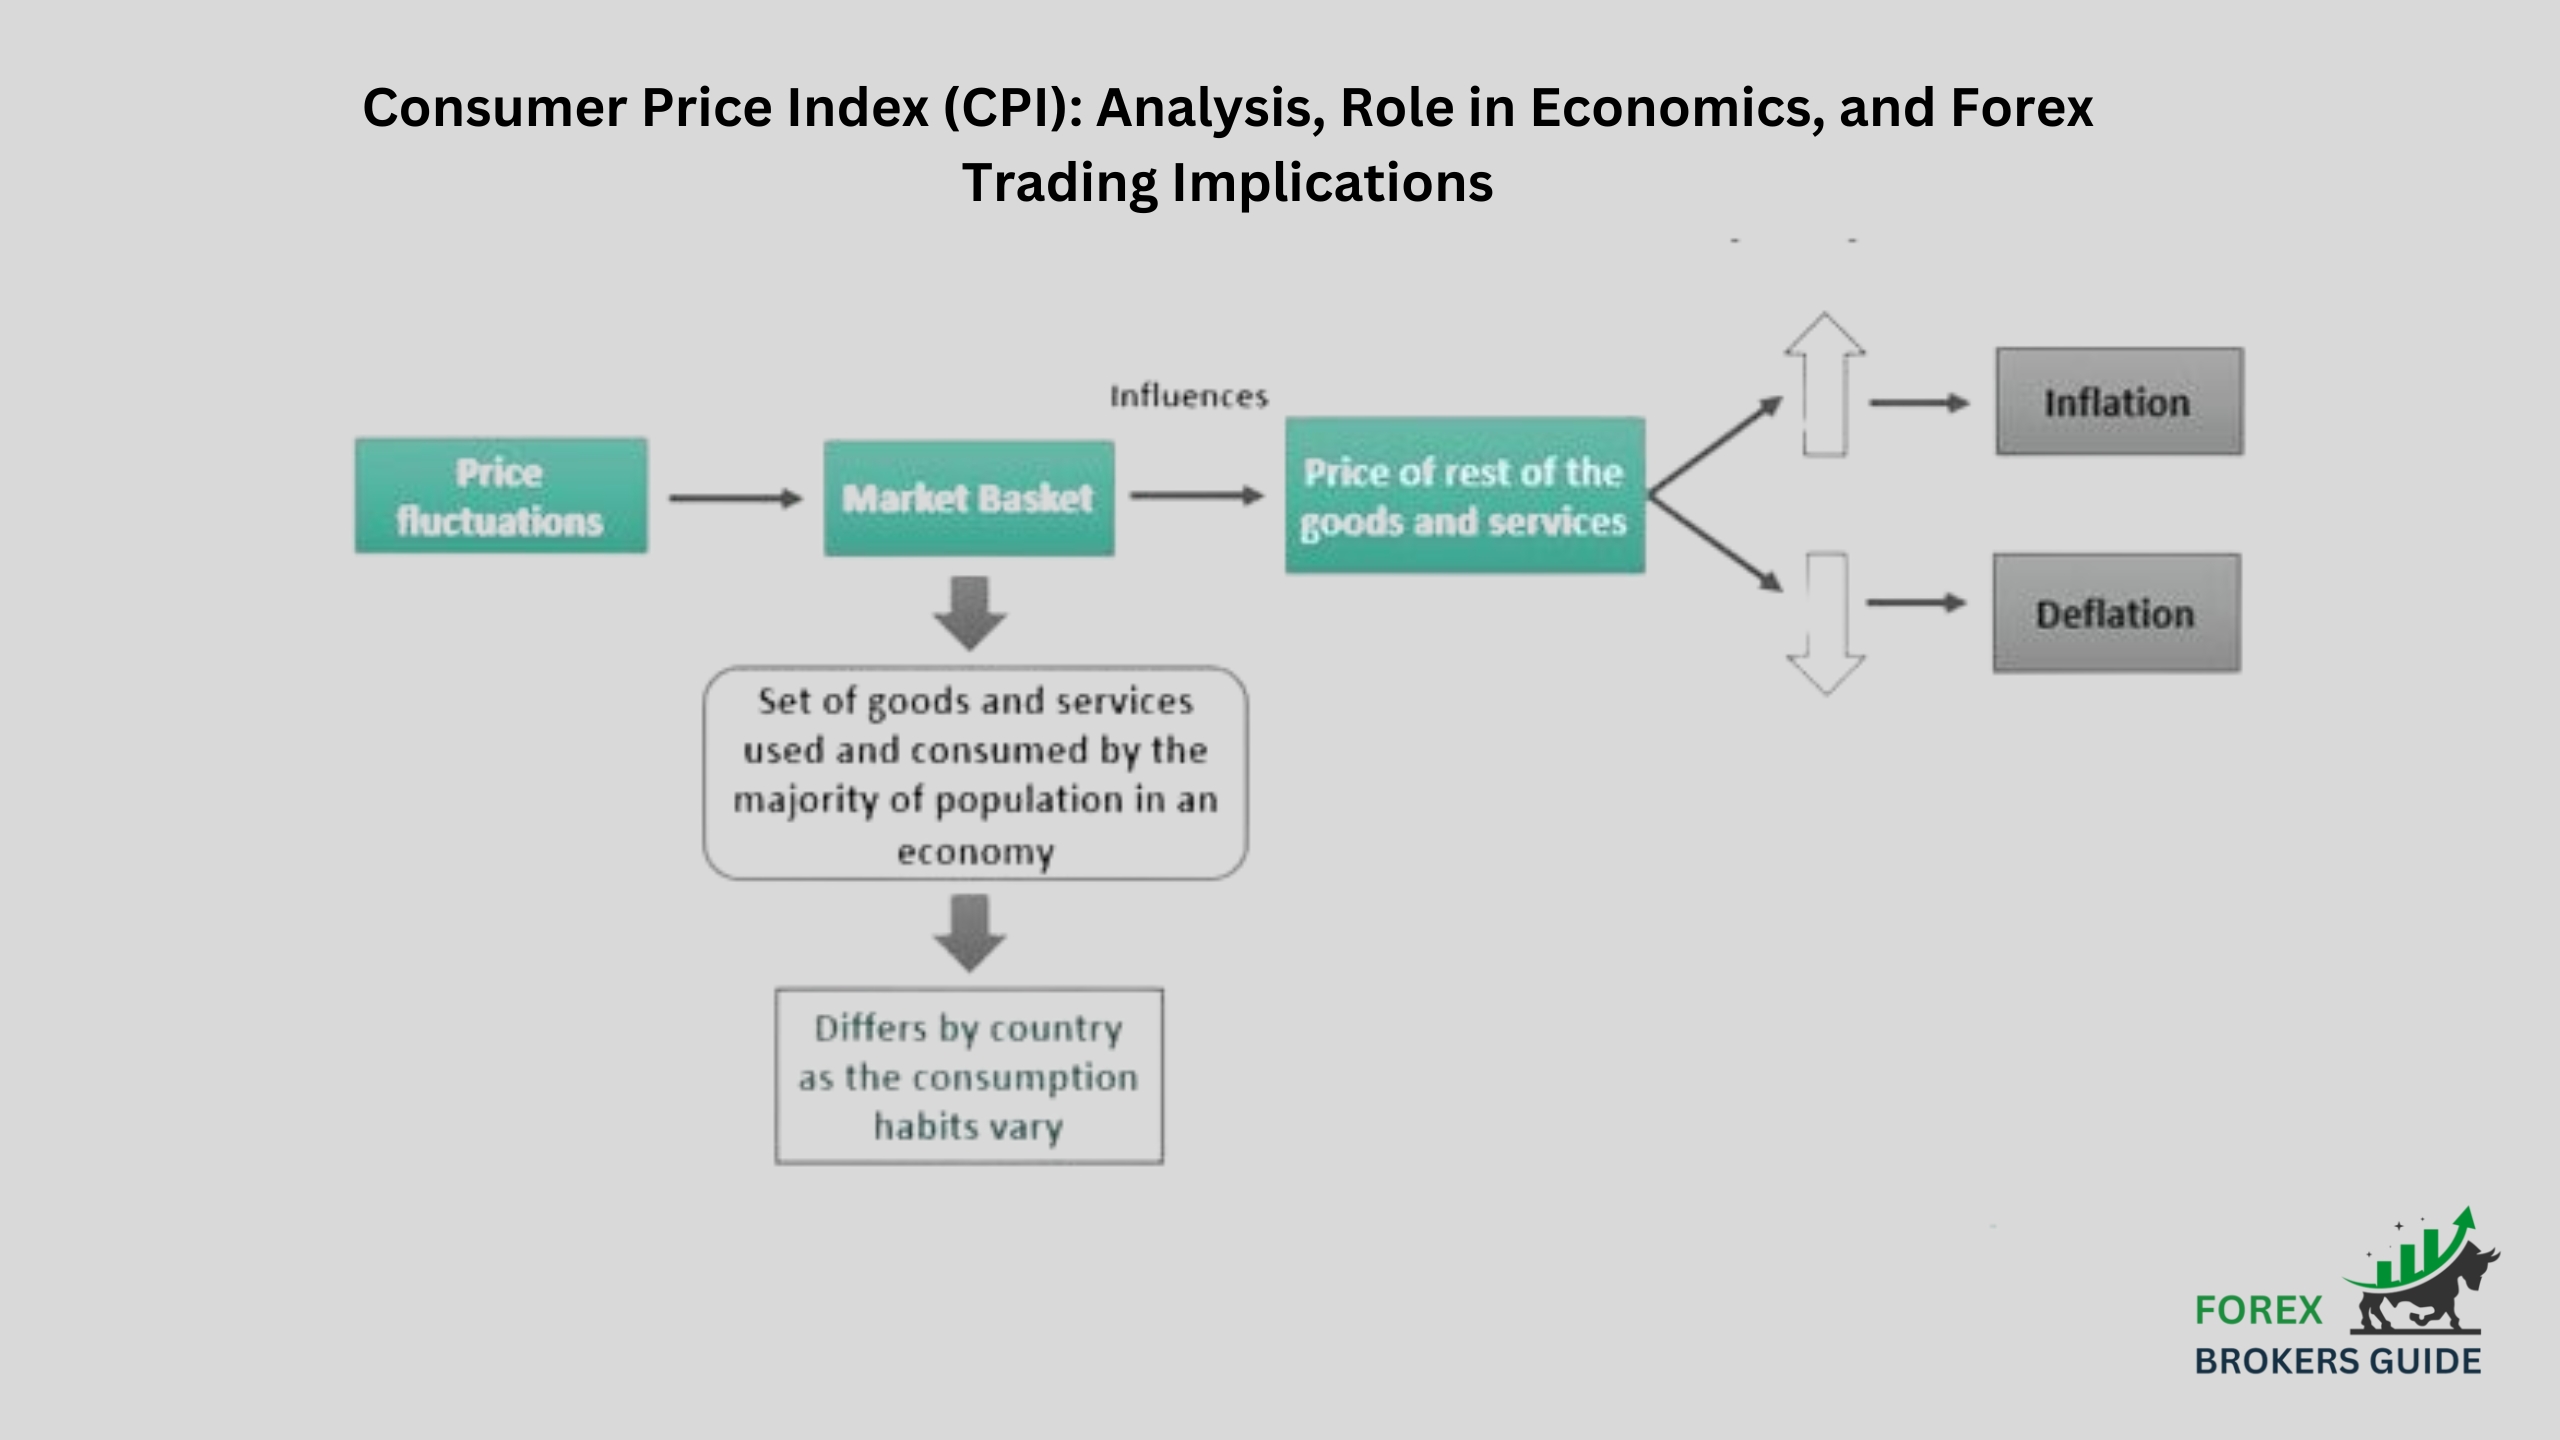 Consumer Price Index (CPI) Analysis, Role in Economics, and Forex Trading Implications